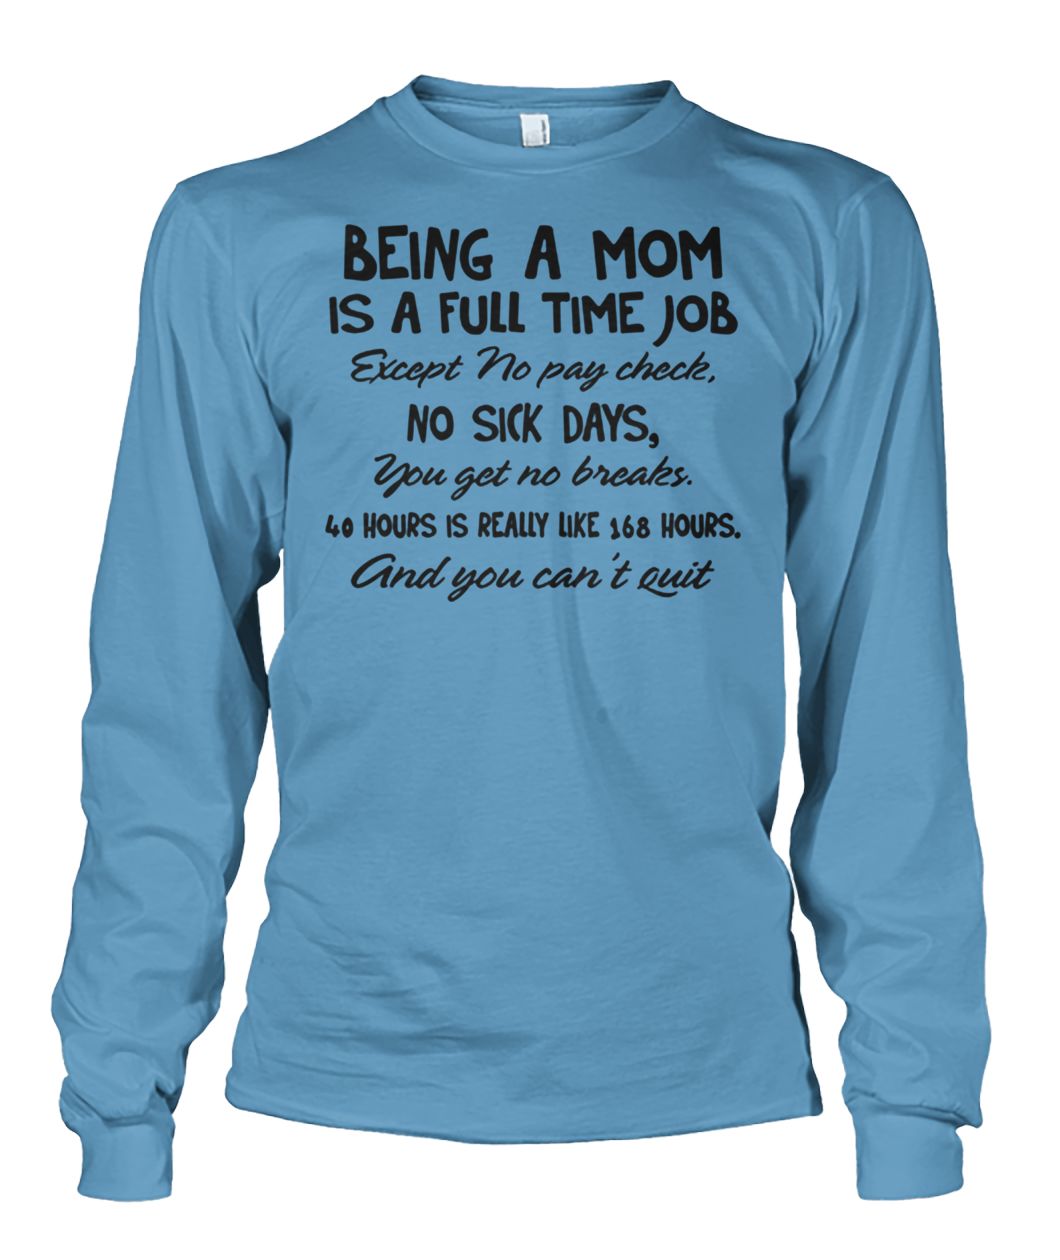 Being a mom is a full time job except no pay check no sick days unisex long sleeve